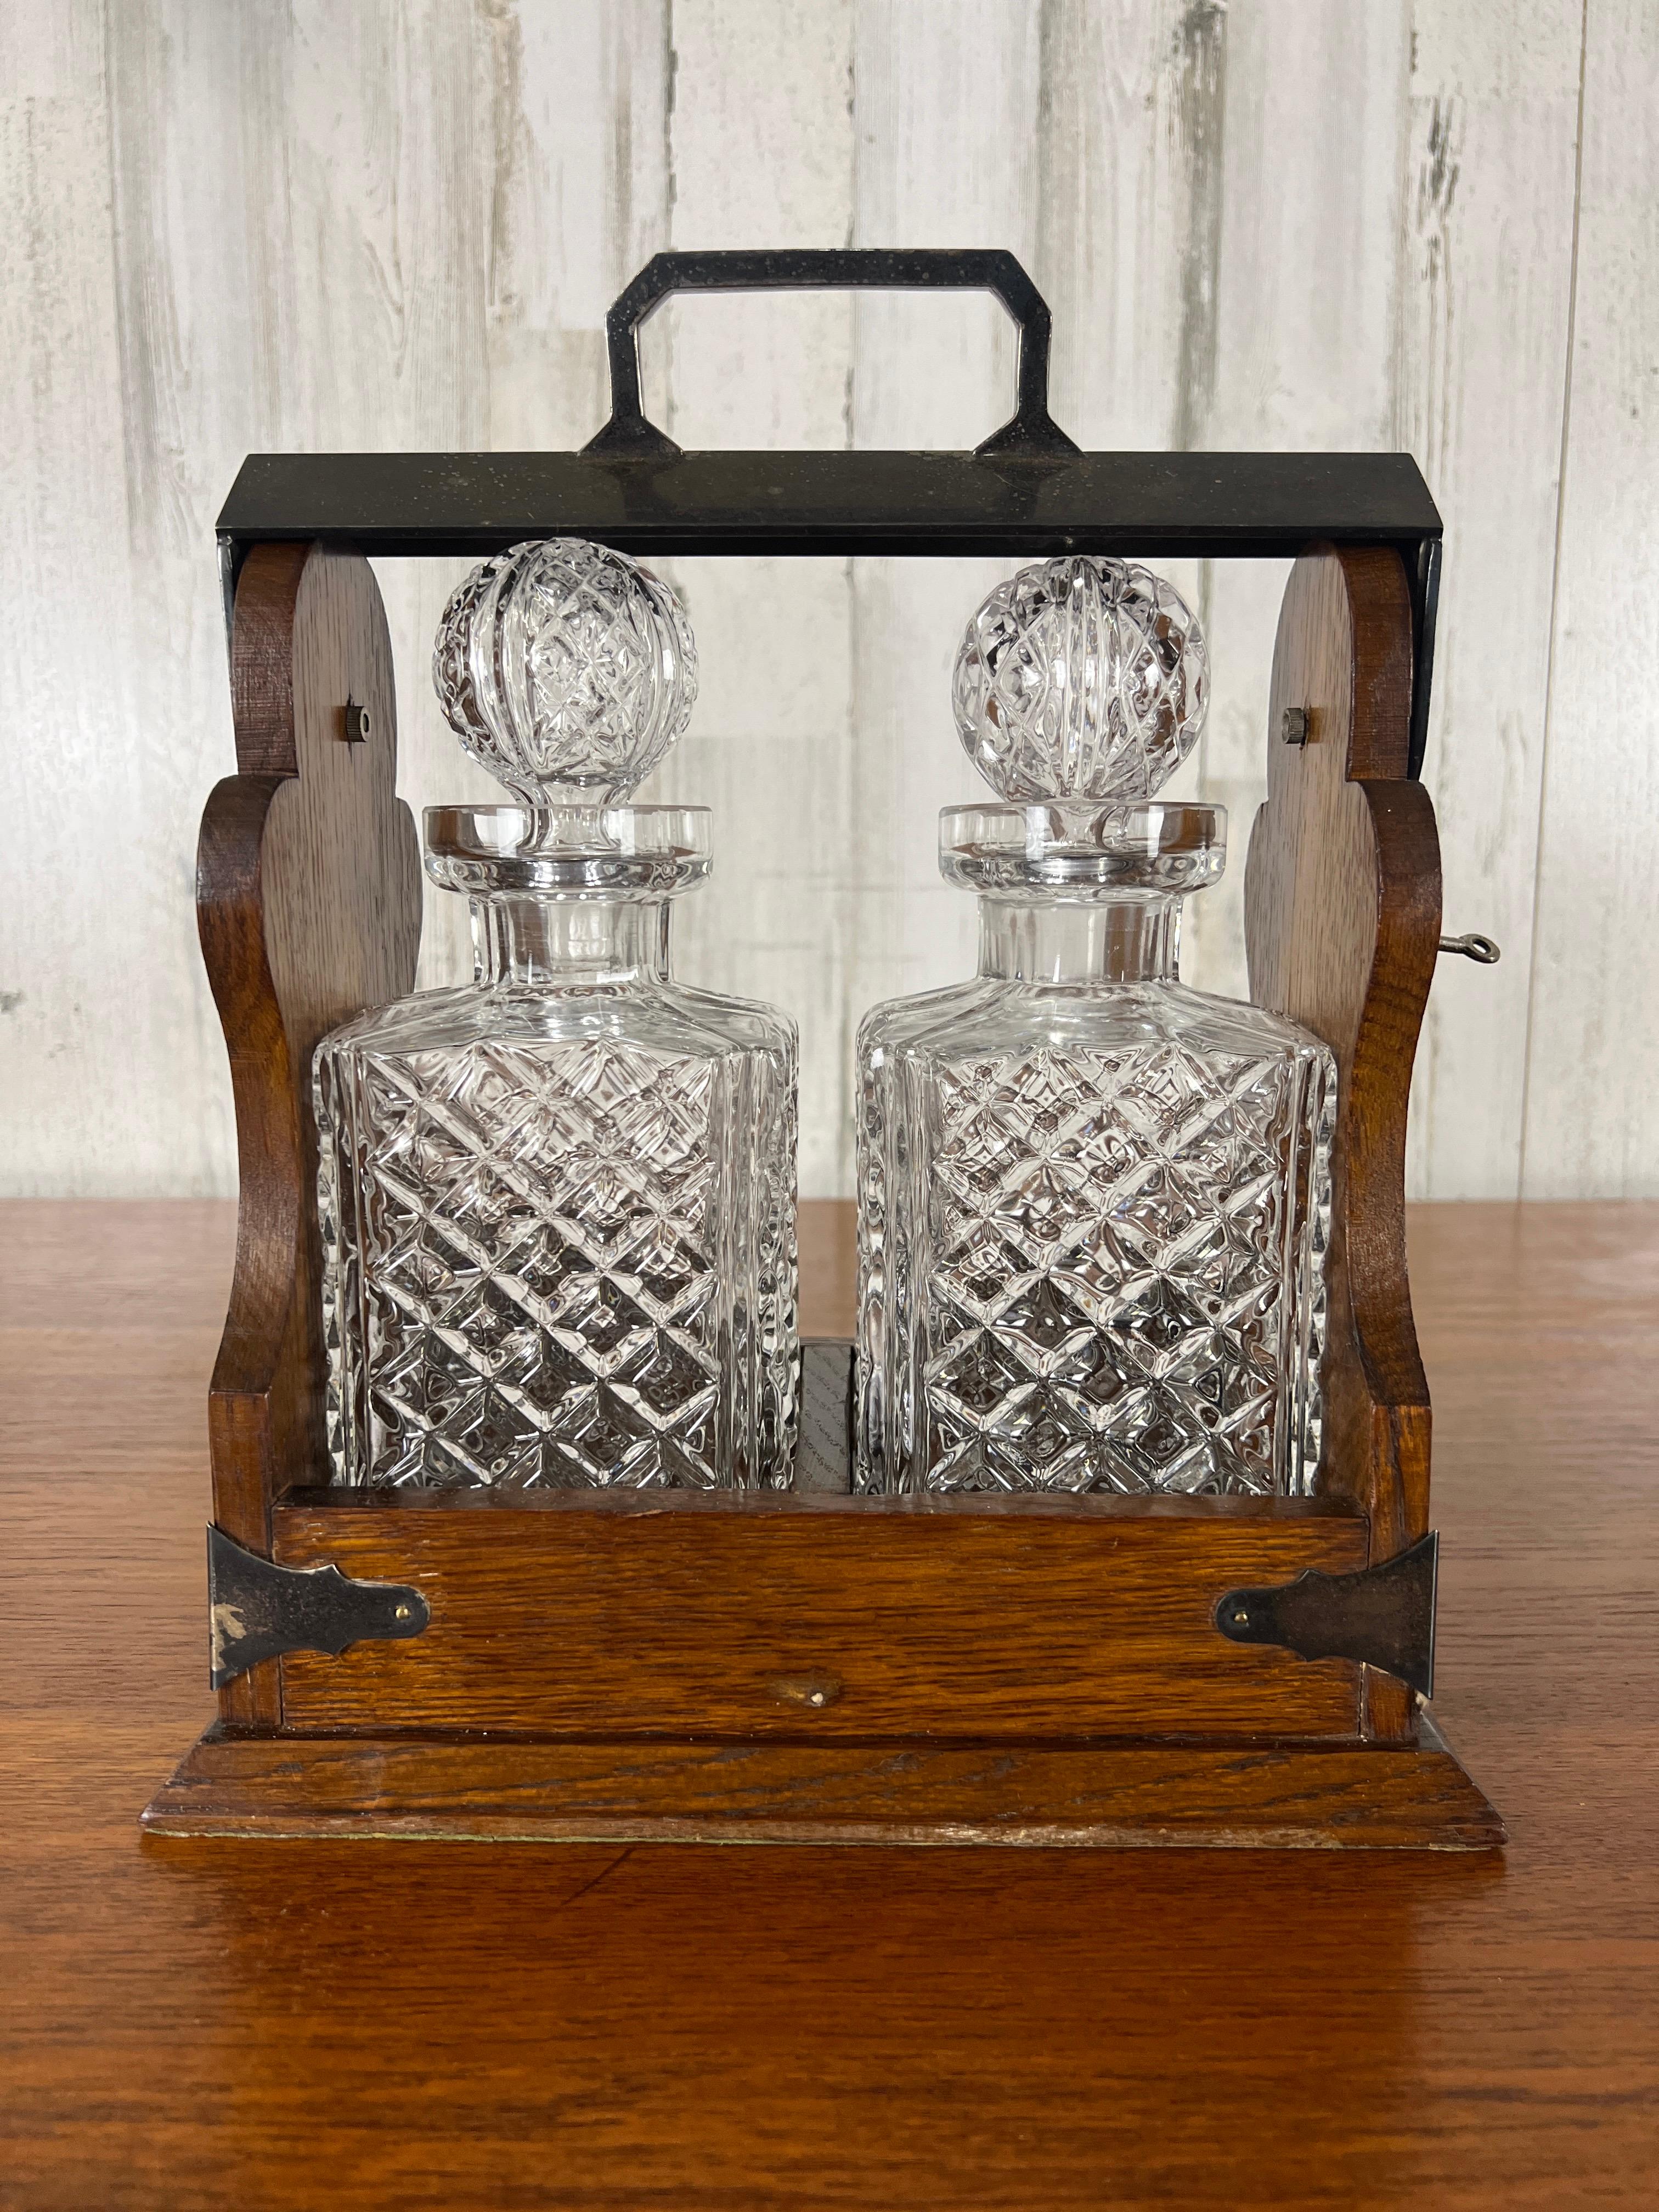 Early 20th century English Tantalus. Solid oak travel caddy with two cut glass decanters and a key for safety.